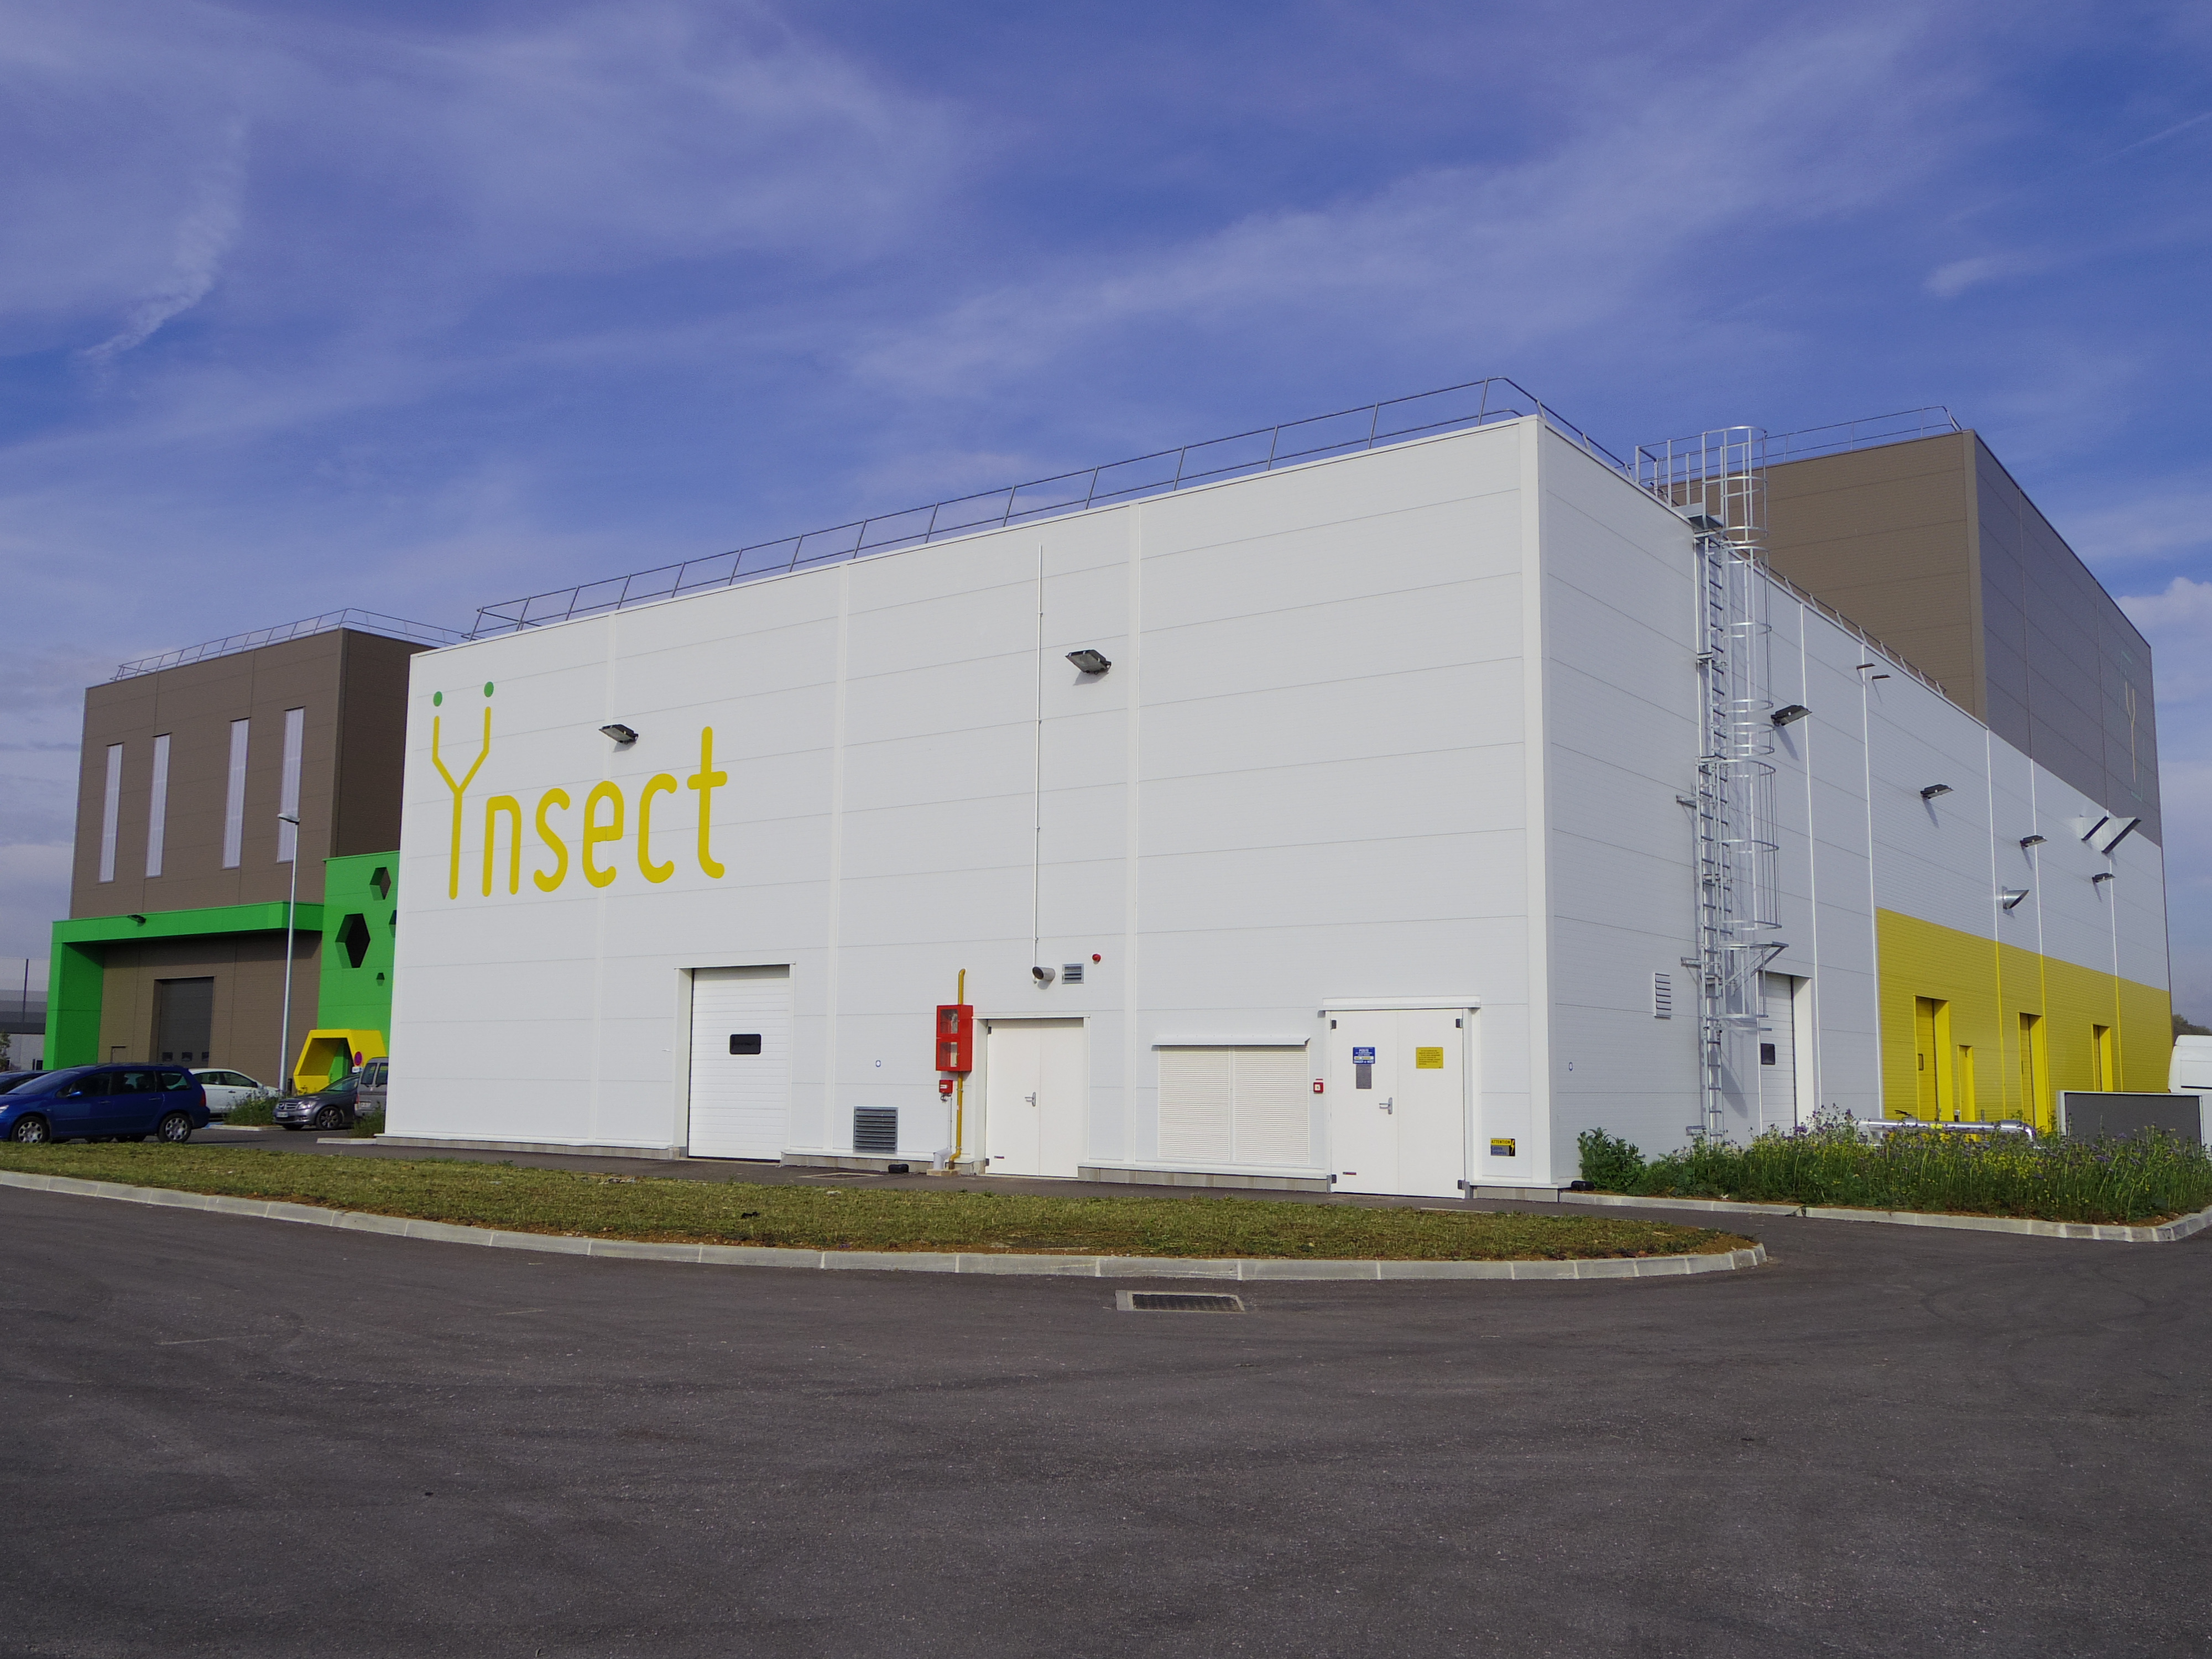 Ÿnsect recently built Ÿnsite, a demonstration facility designed to produce insects at large scale